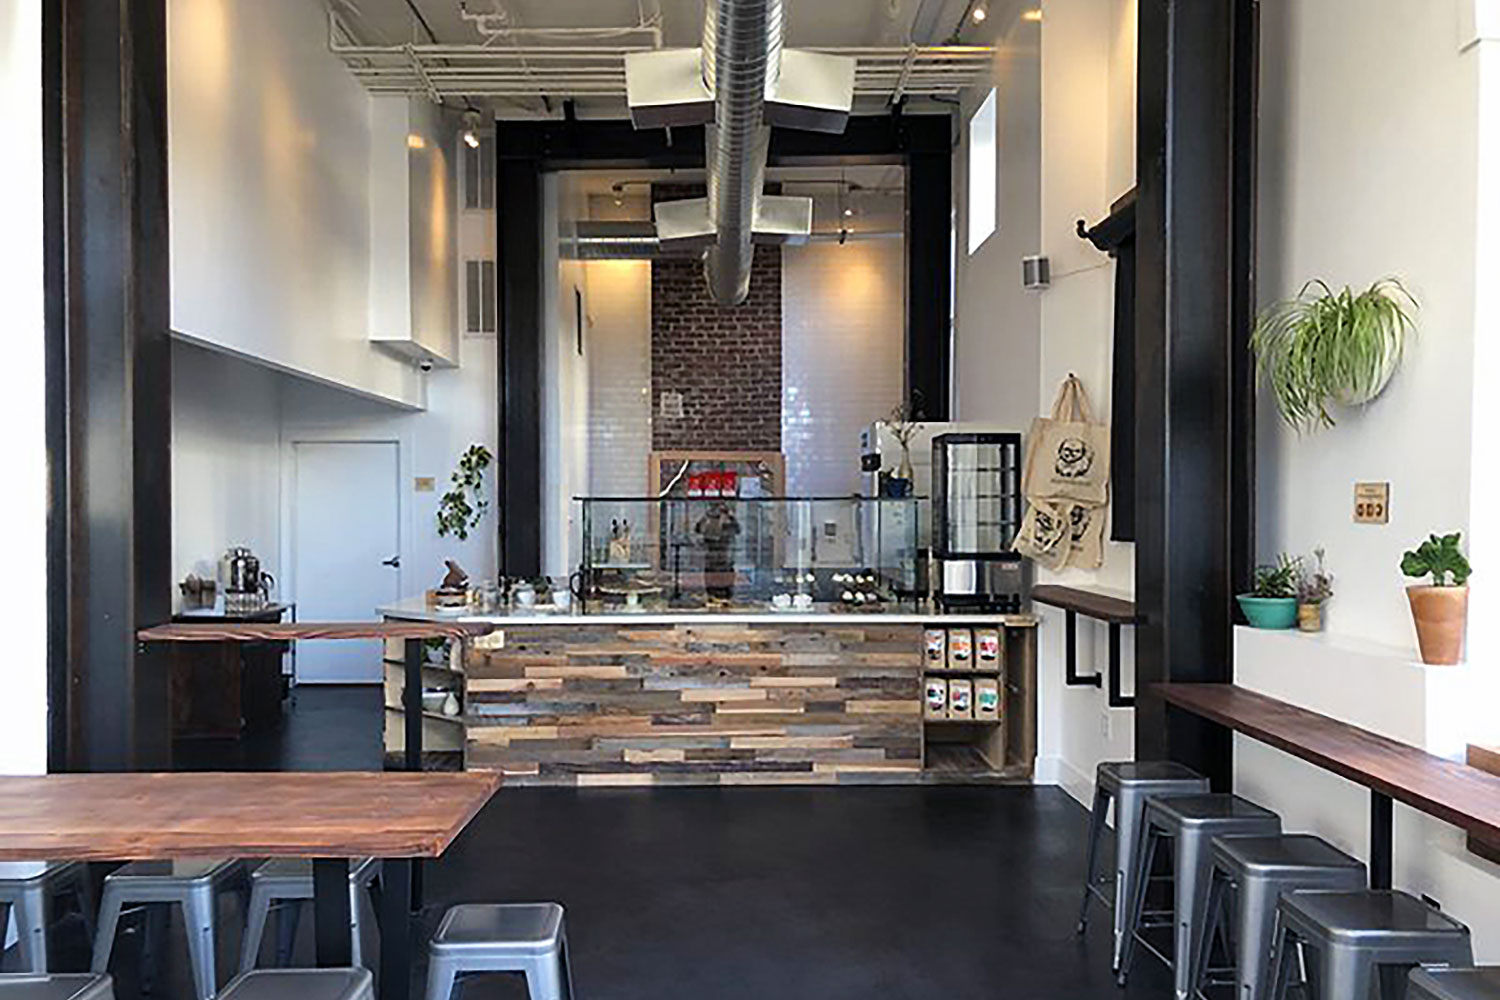 Bakery interior. Custom serving counter area built with reclaimed wood, stone countertops, and glass display racks. Space has high ceilings, white walls with hanging plants and display art. Polished concrete floor